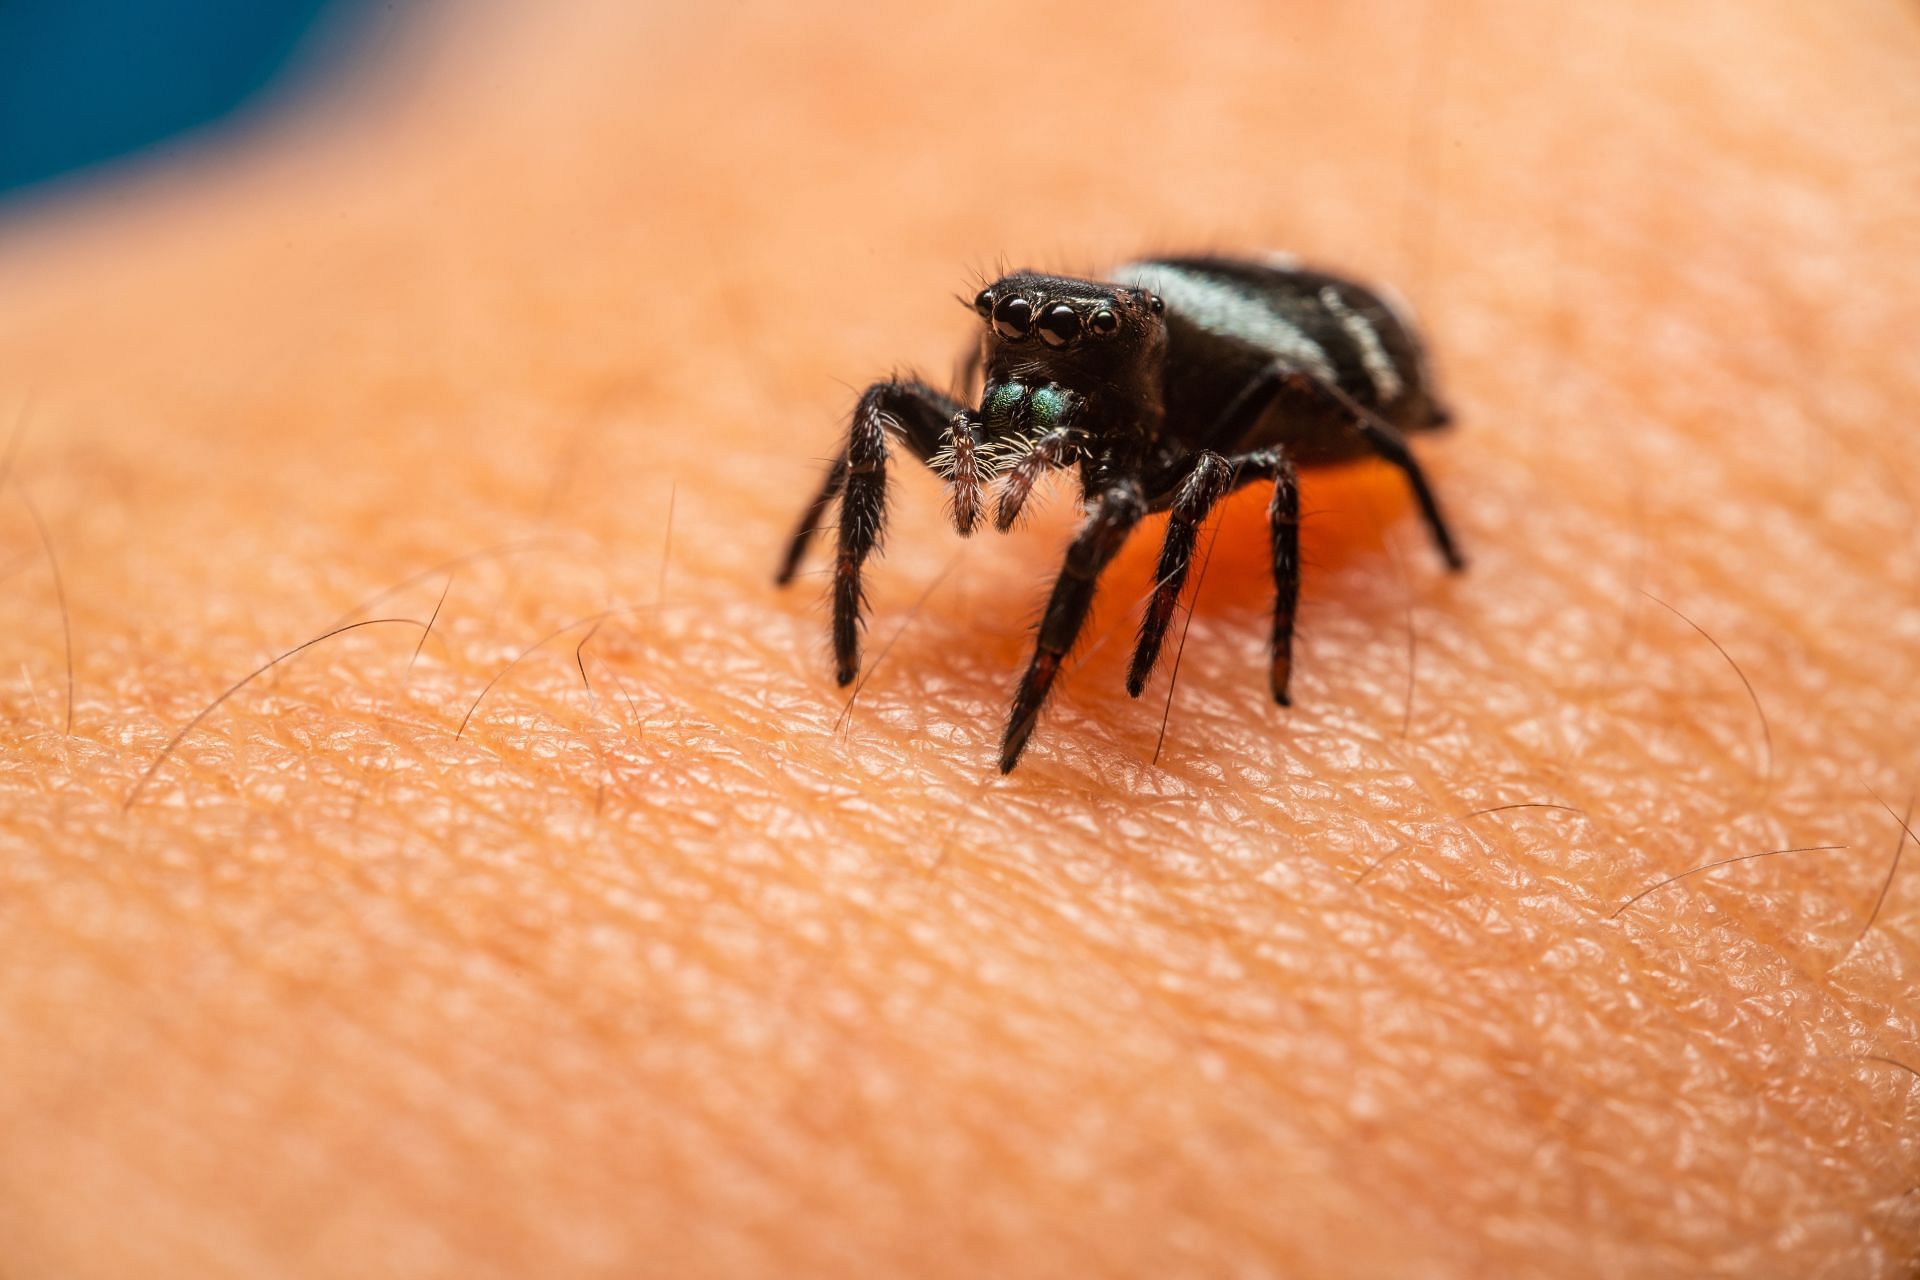 Spider bites can range from minor irritation to serious medical emergencies (Photo by Jimmy Chan/pexels)